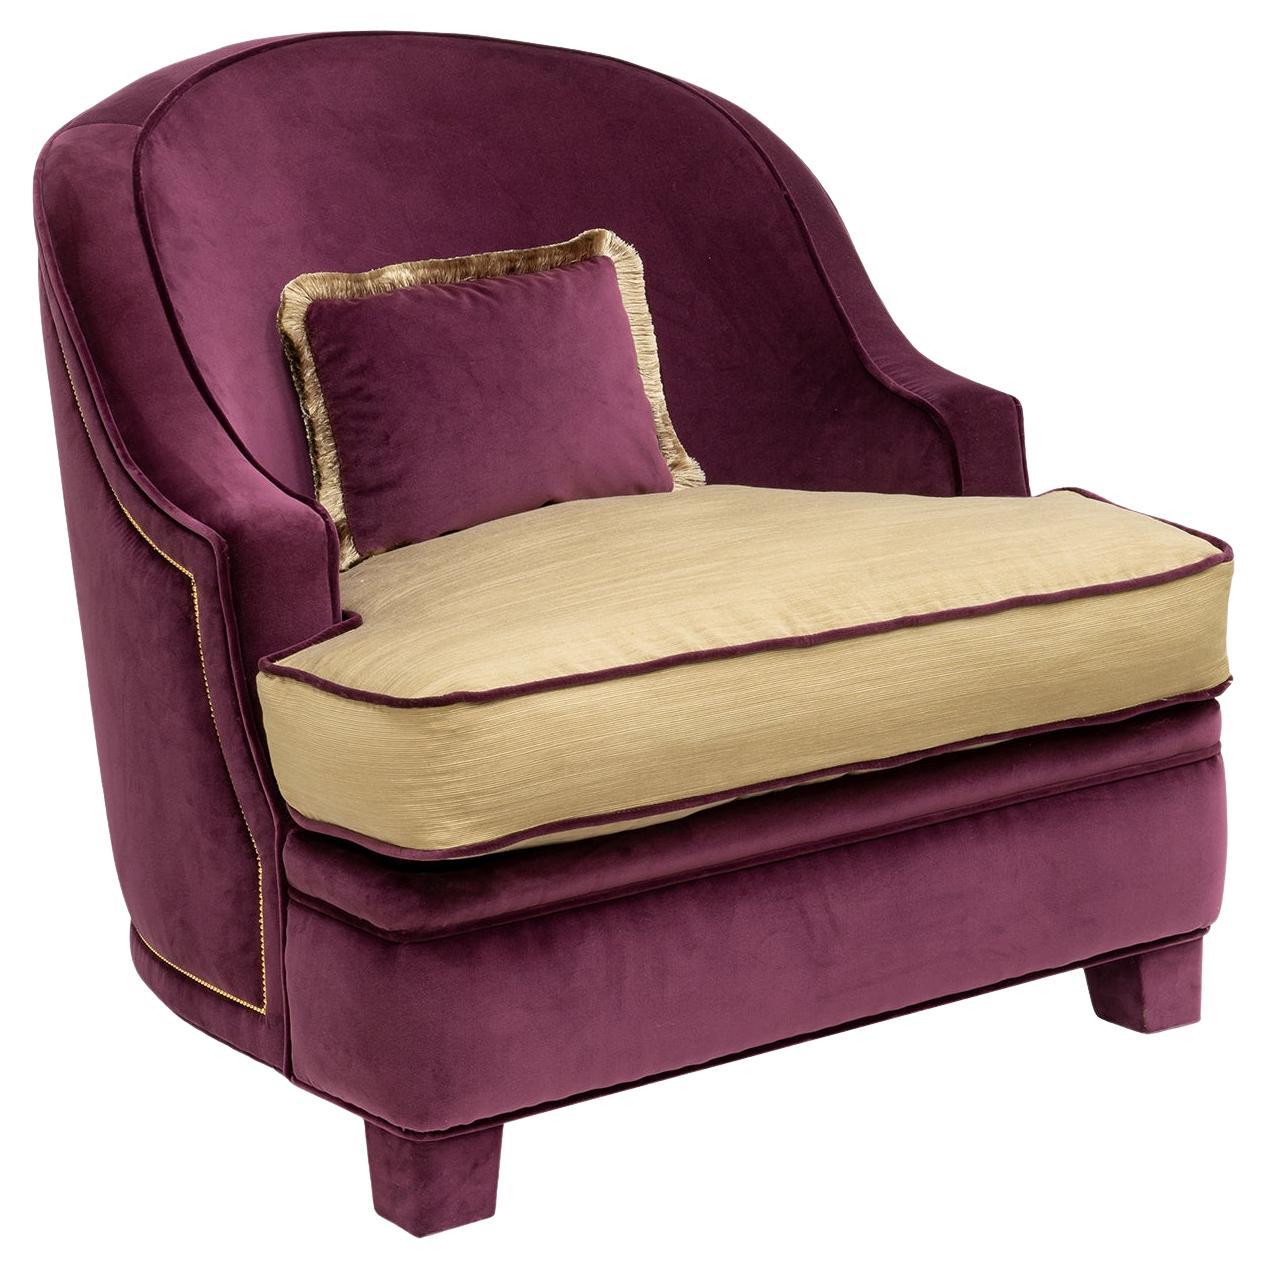 Classic-Style Armchair For Sale